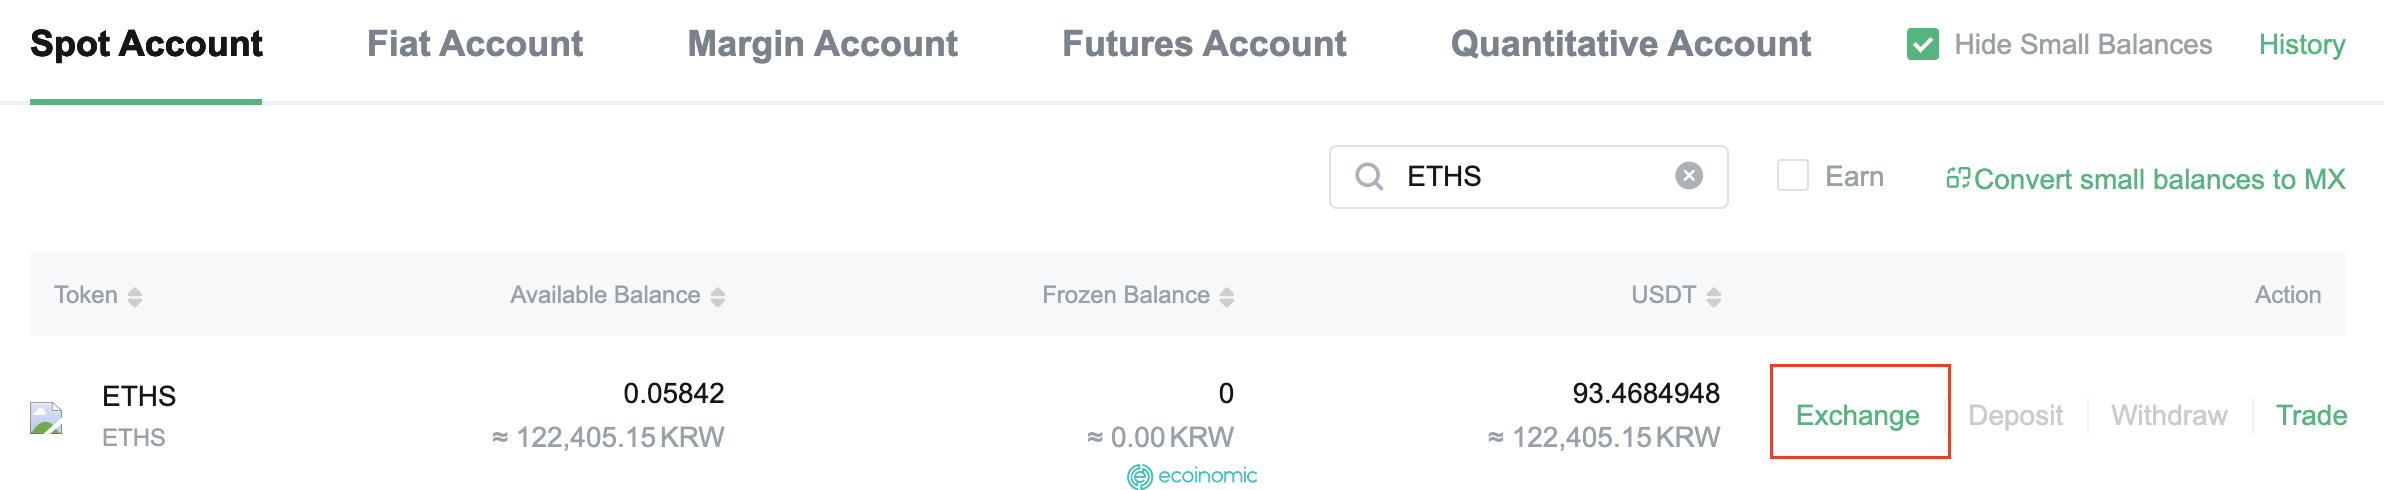 Find ETHS or ETHW in your spot account, tap Exchange